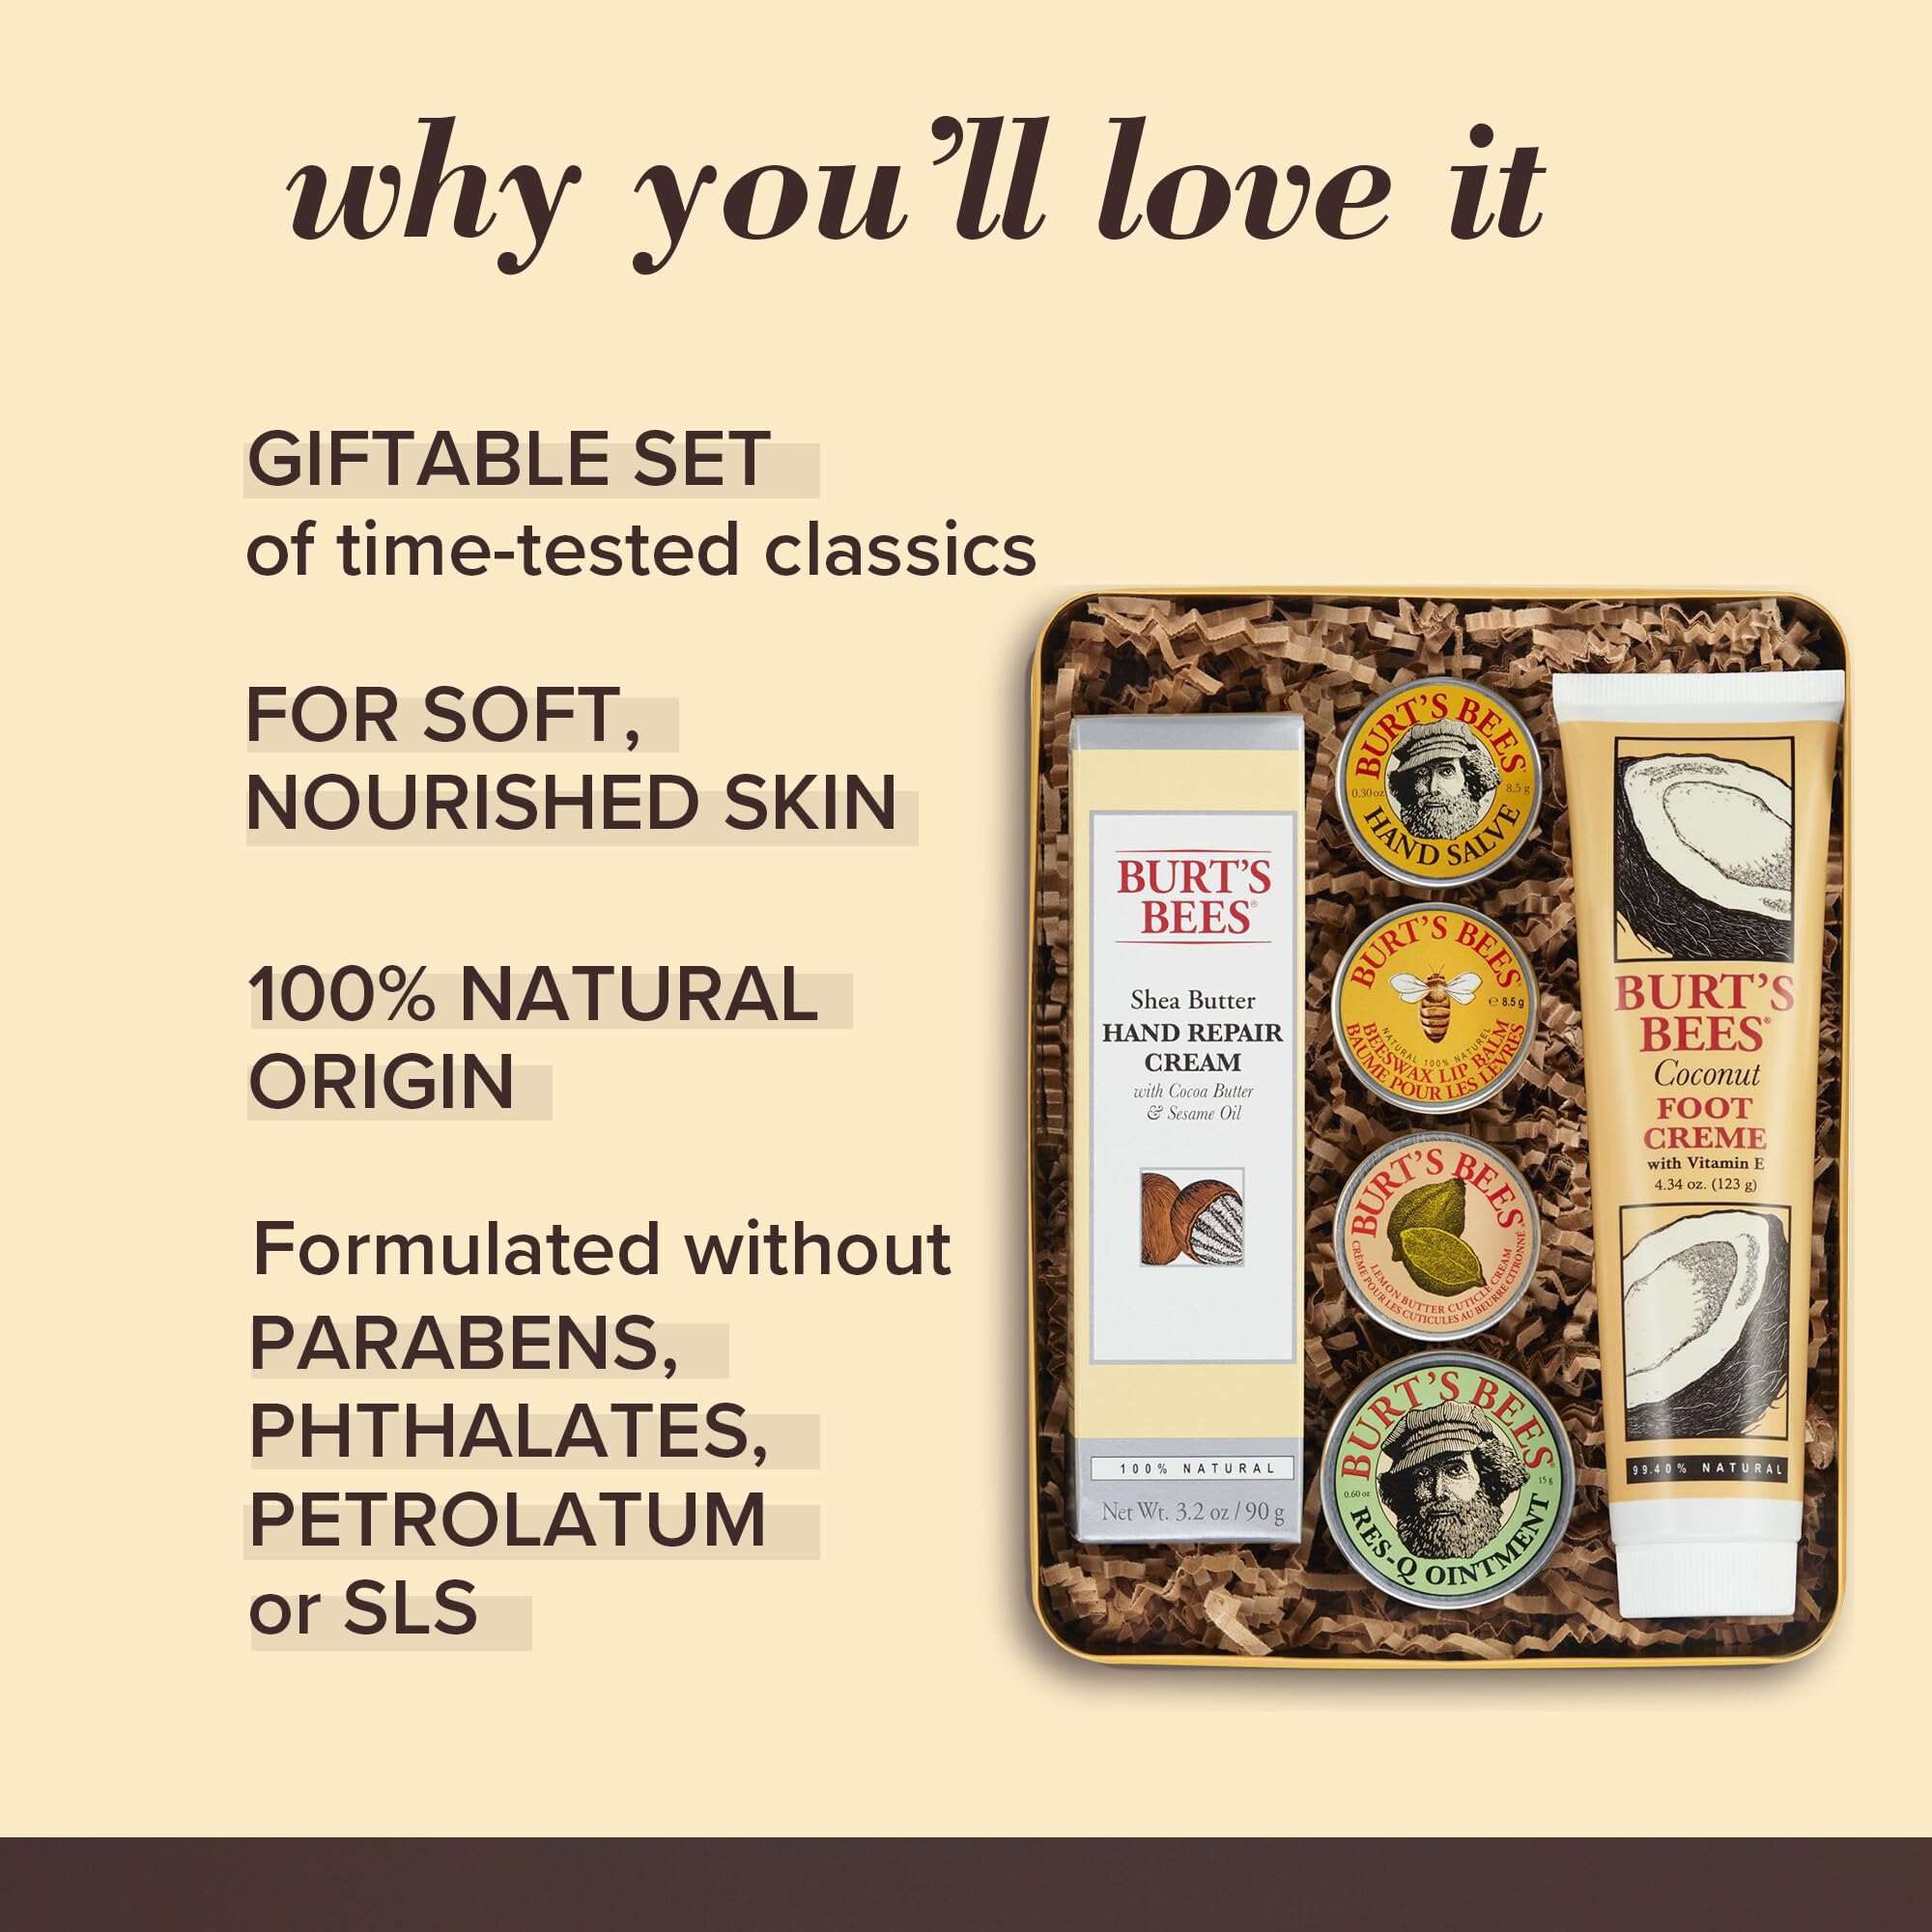 Burt's Bees Classics Valentines Day Gifts Set, 6 Products in Giftable Tin – Cuticle Cream & Lip Balm Valentines Day Gifts, Original Beeswax, Lip Moisturizer With Responsibly Source